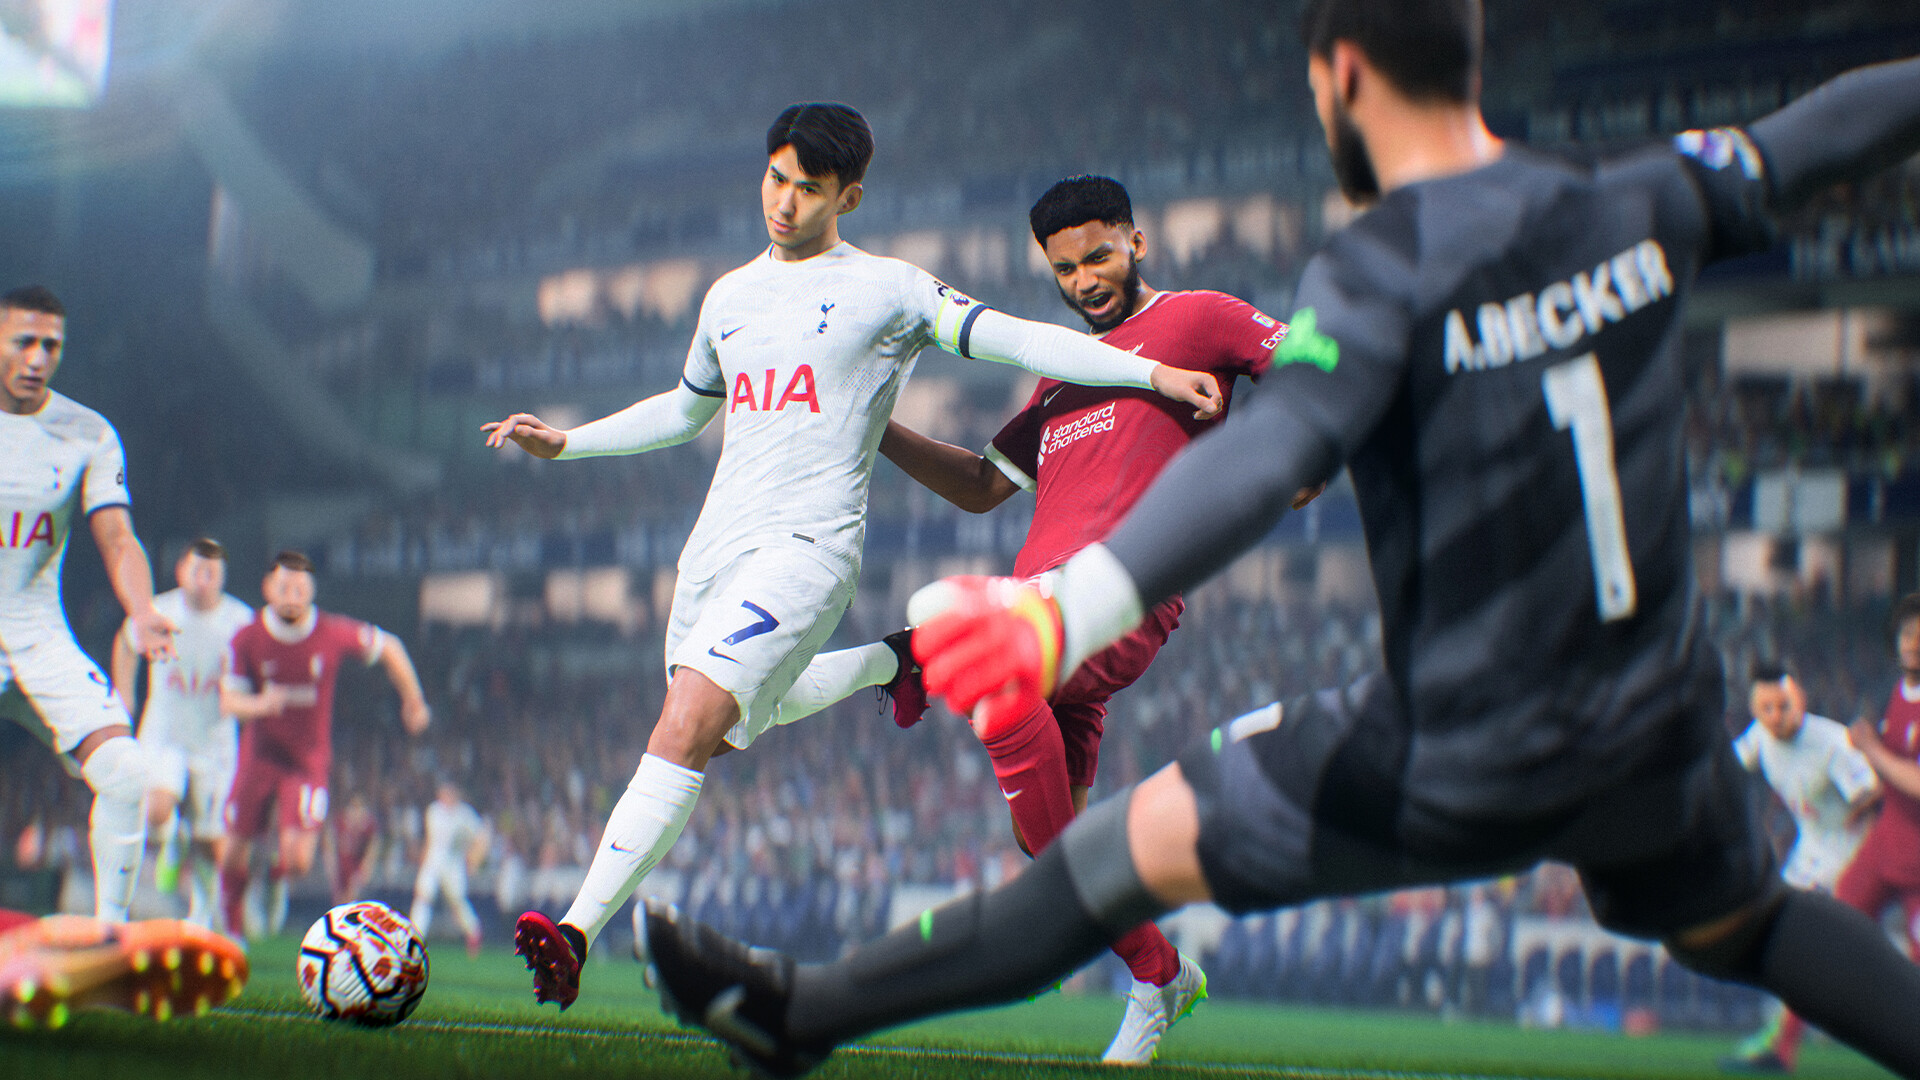 EA FC 24: Standard Edition is out now!